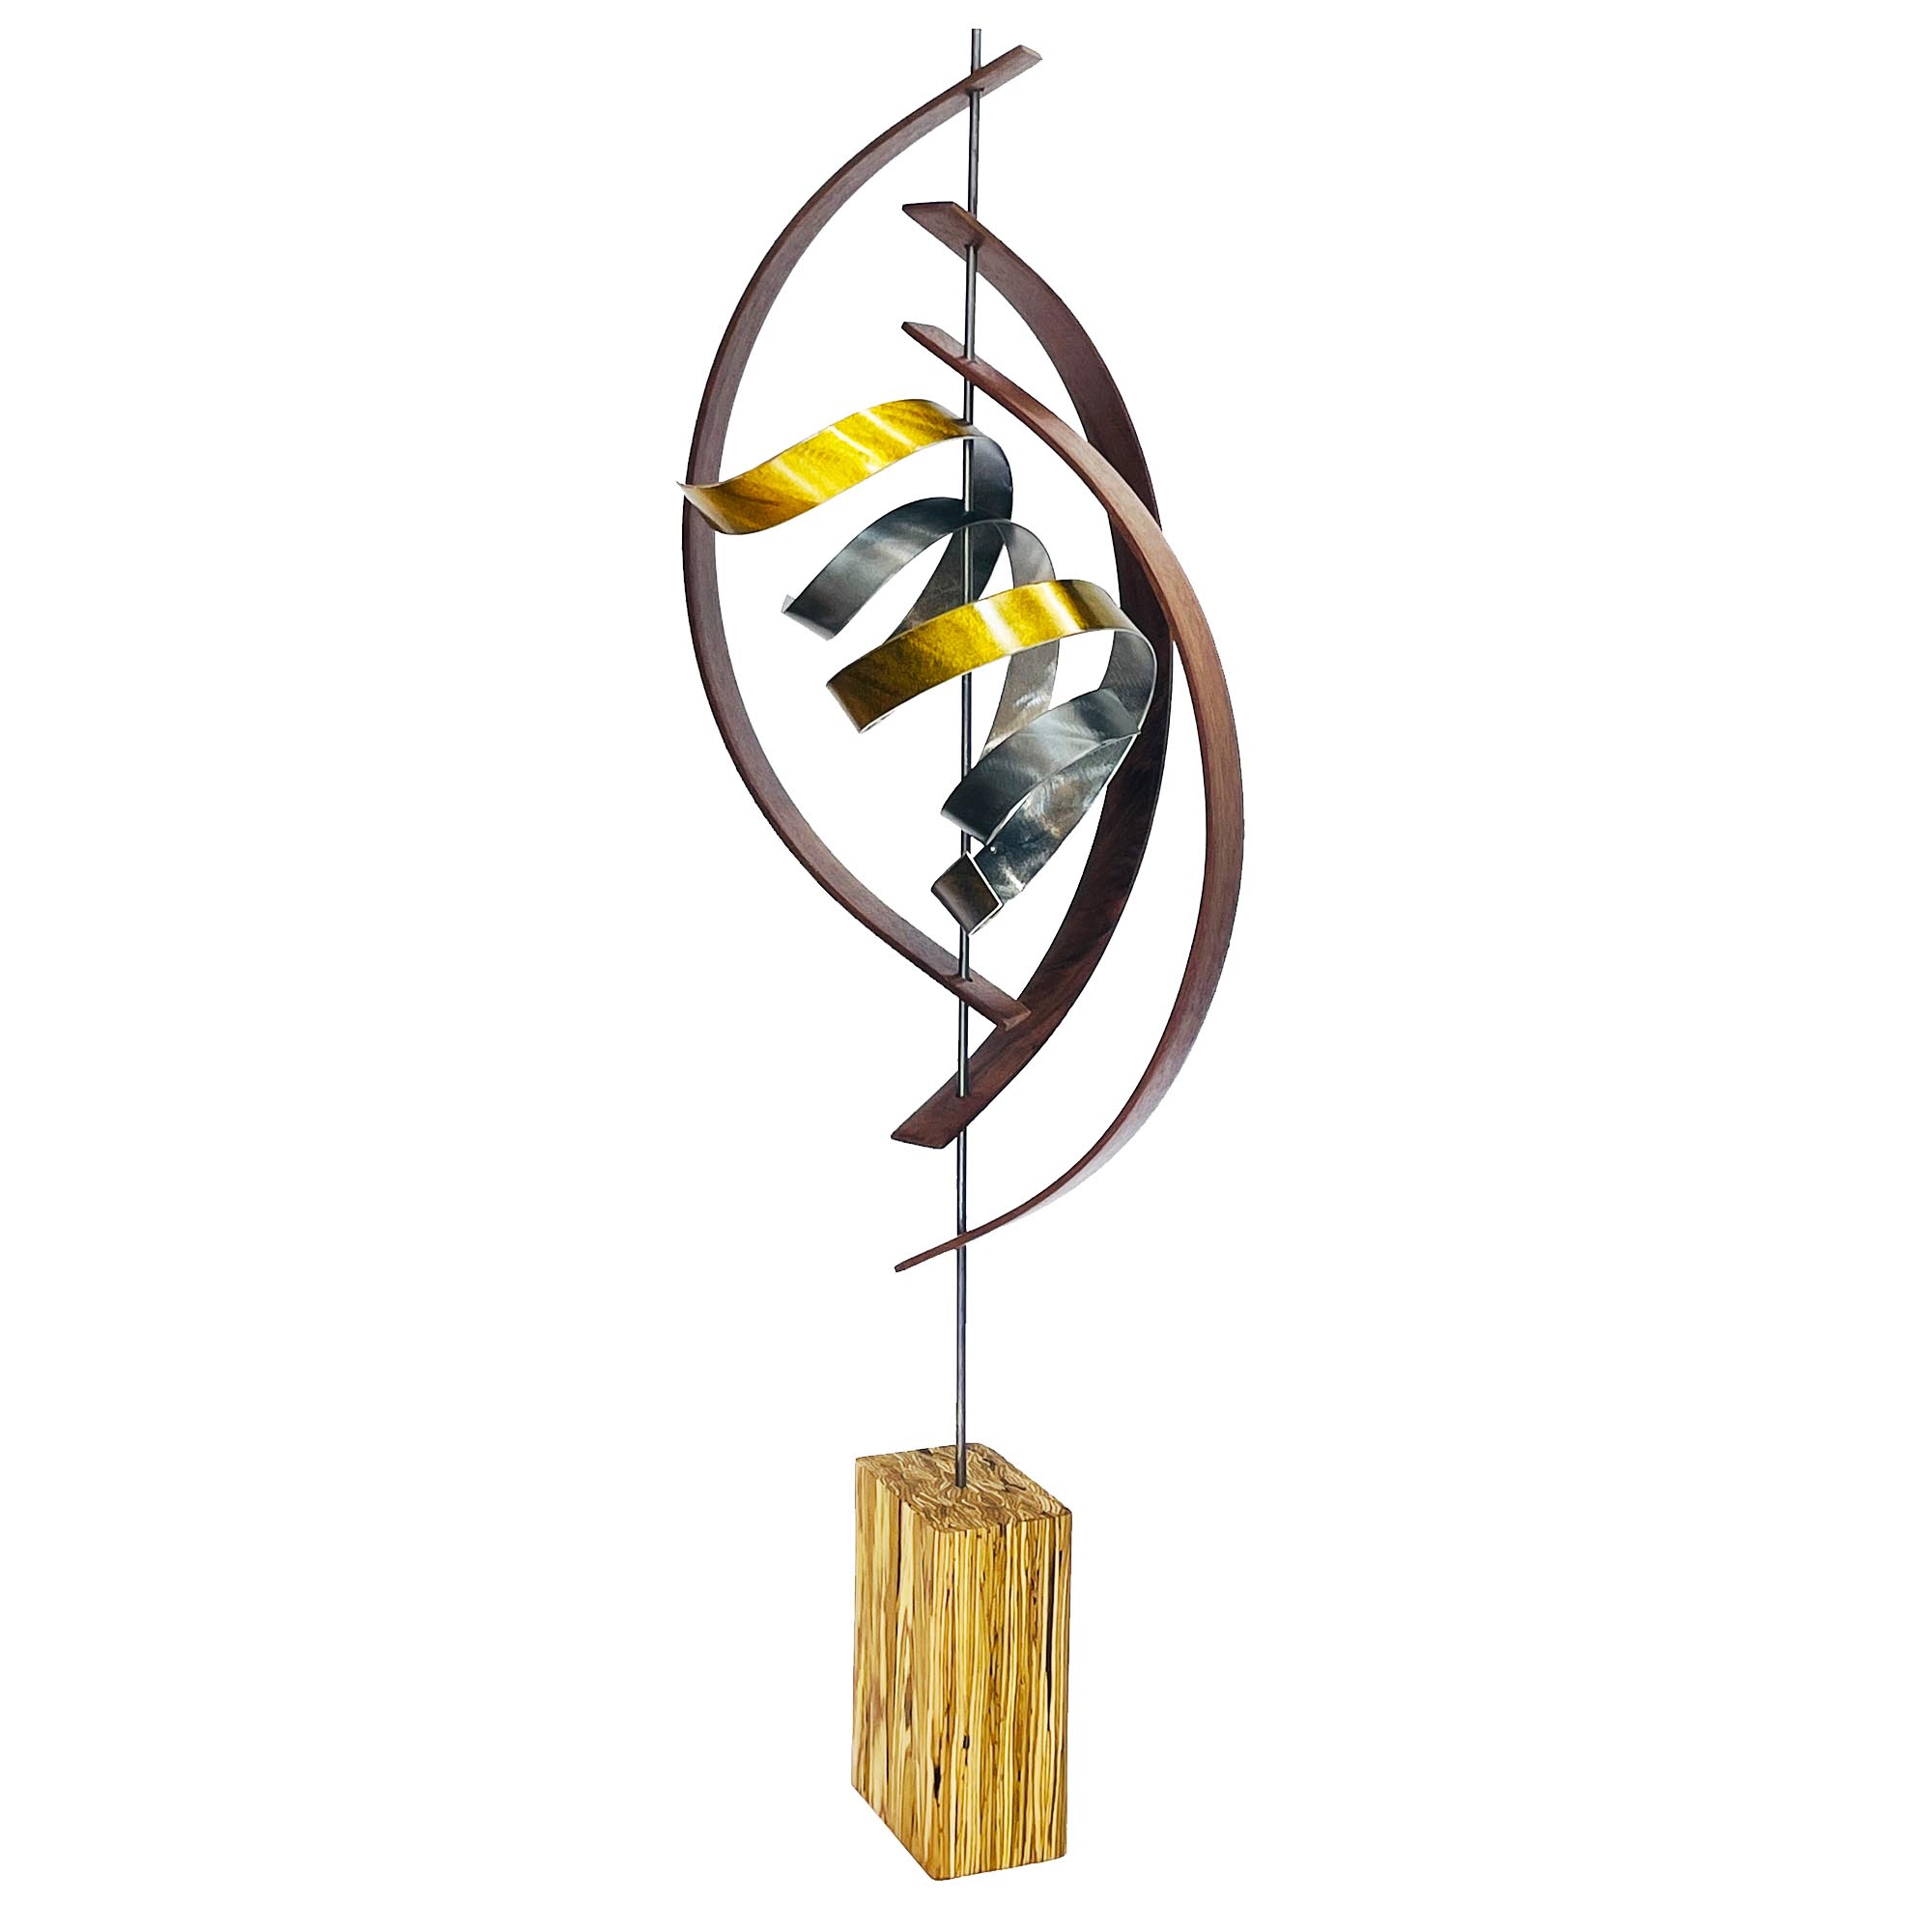 Spiral v2 by Jackson Wright - Abstract Wood Sculpture, Kinetic Sculpture - Image 2